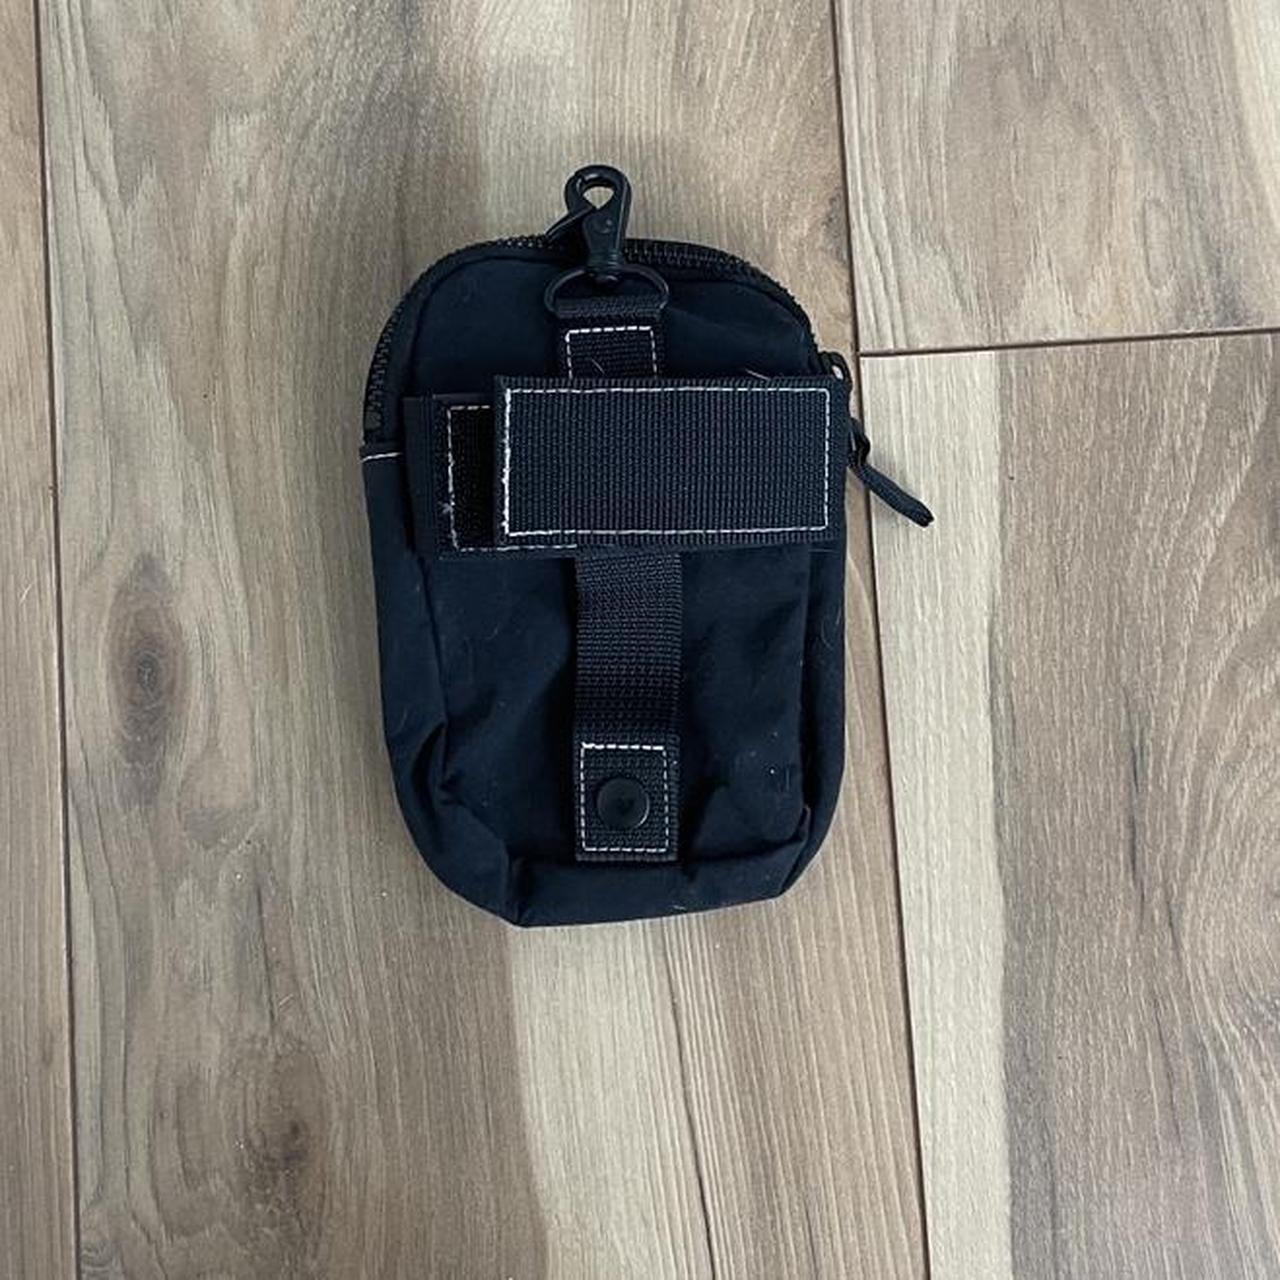 STUSSY X PORTER NECK POUCH, missing the strap, Retail